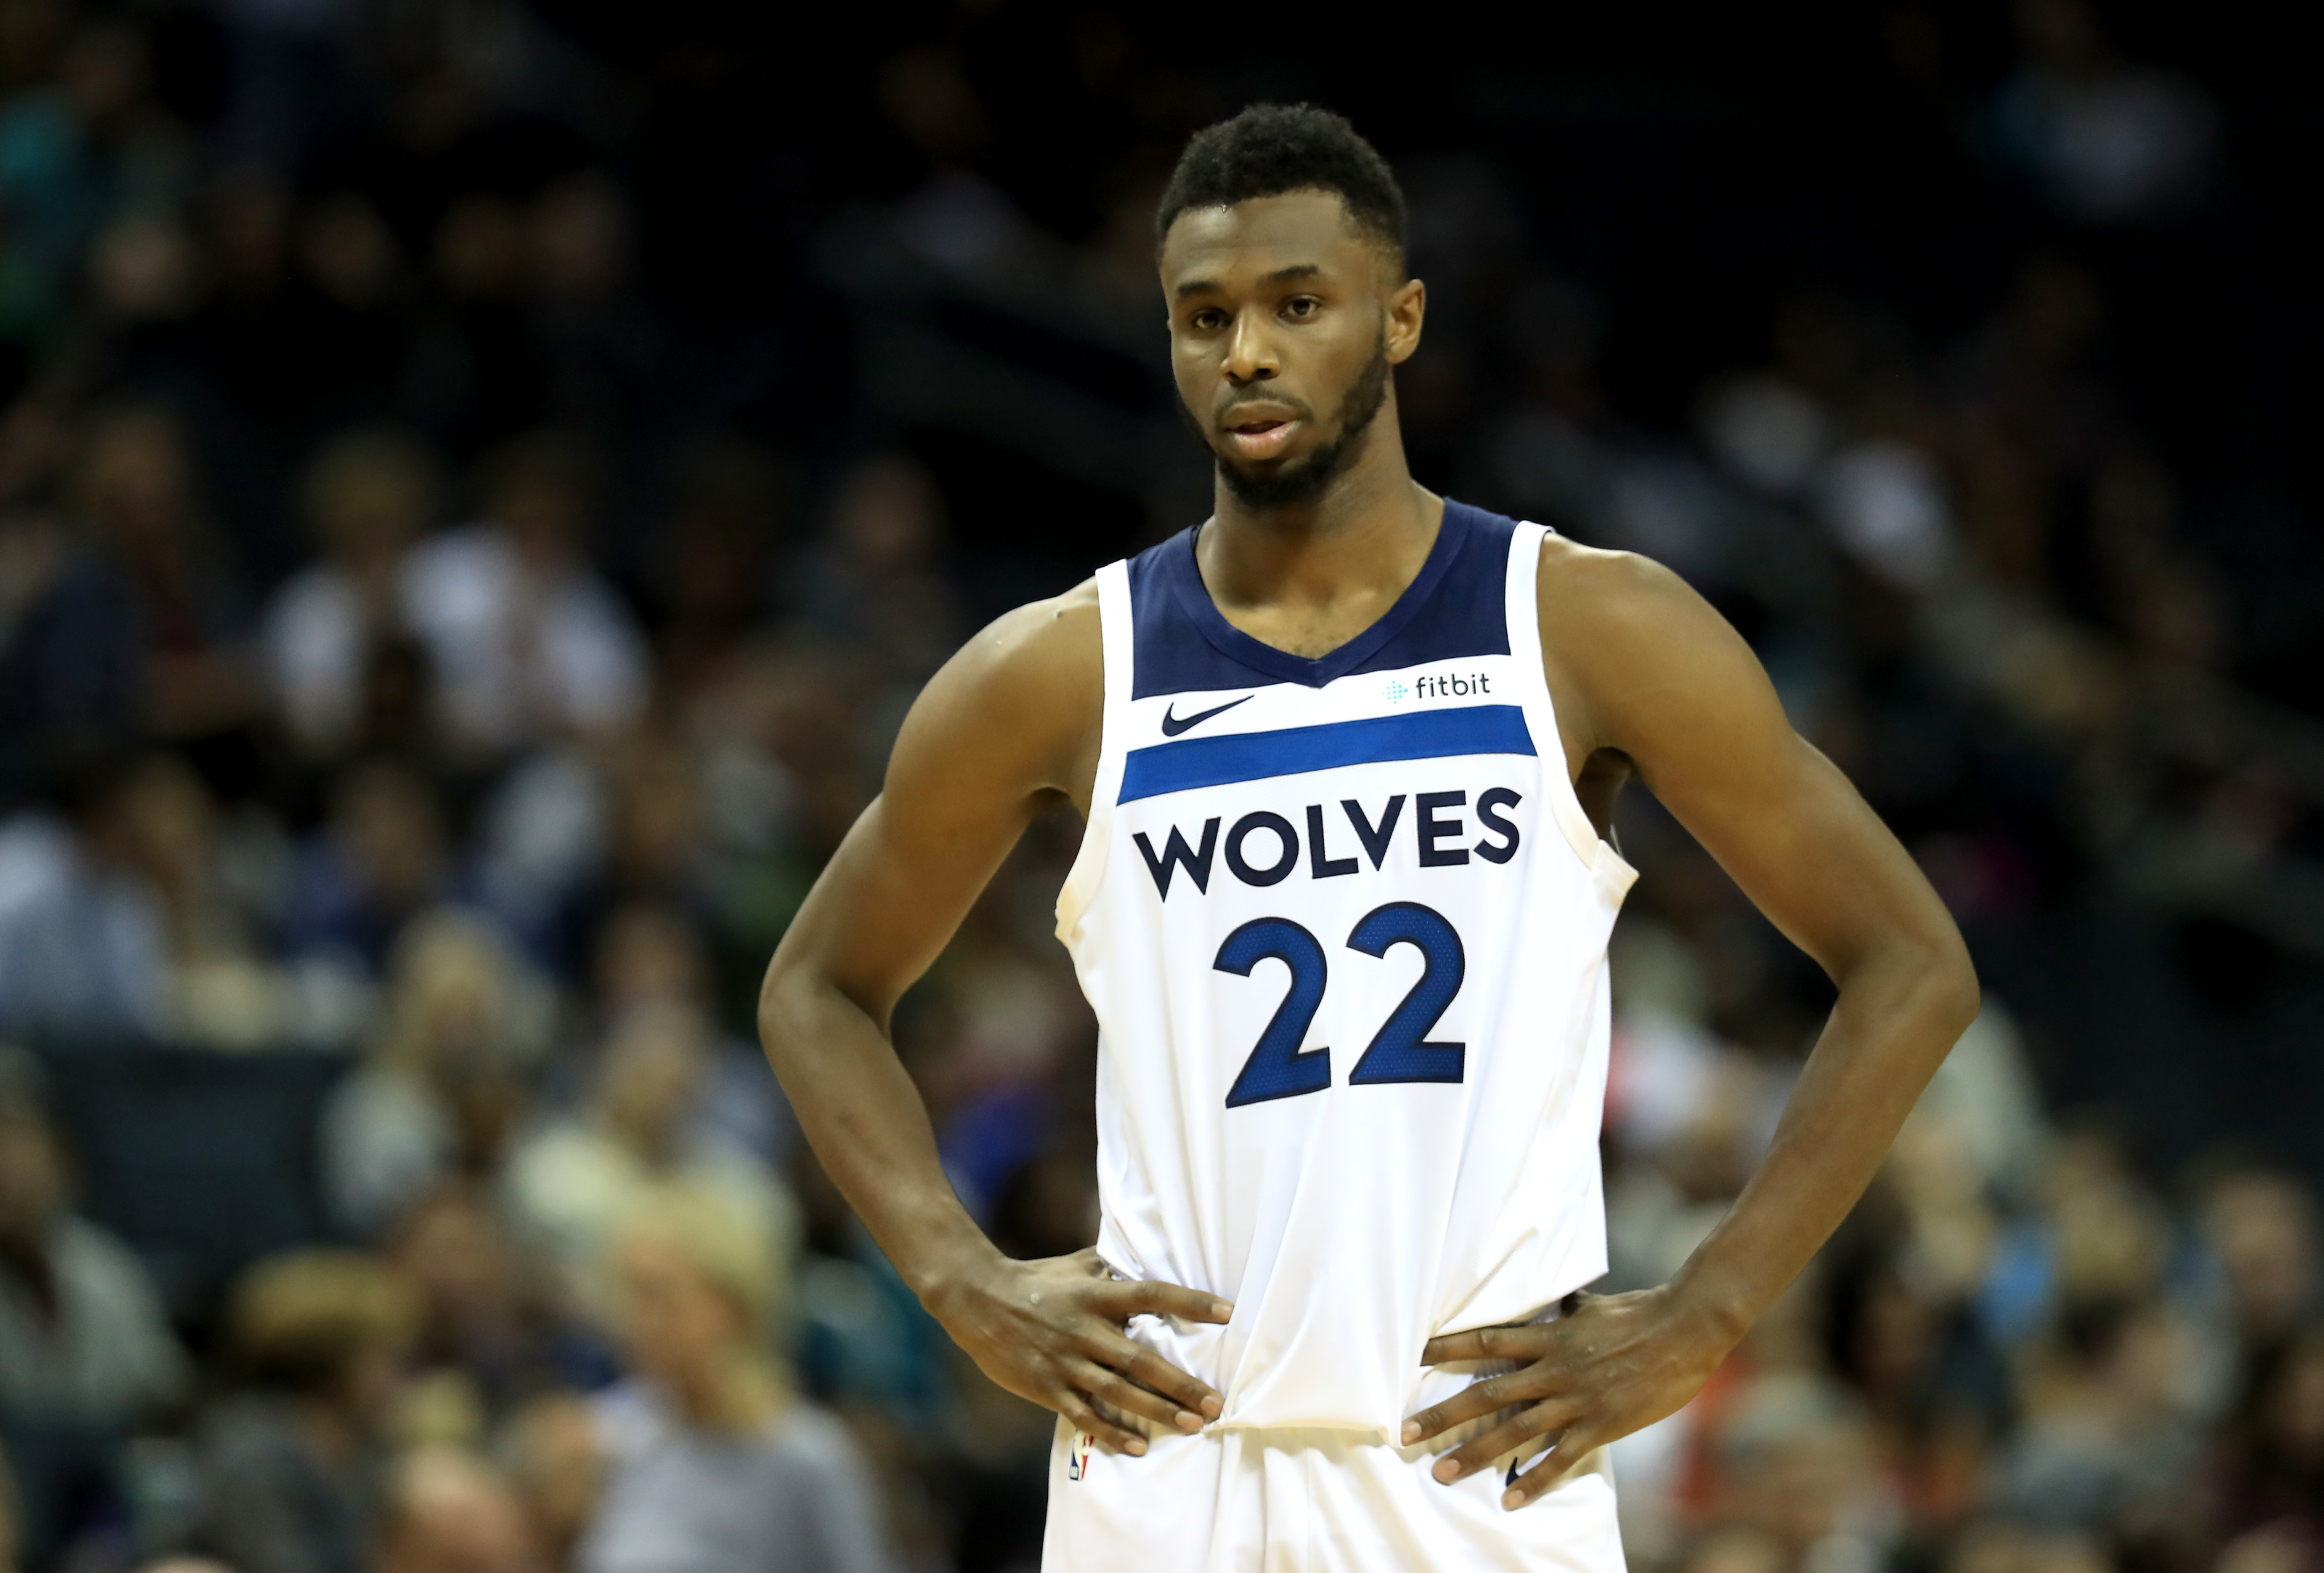 NBA: Andrew Wiggins nearly misses start because he didn't have jersey